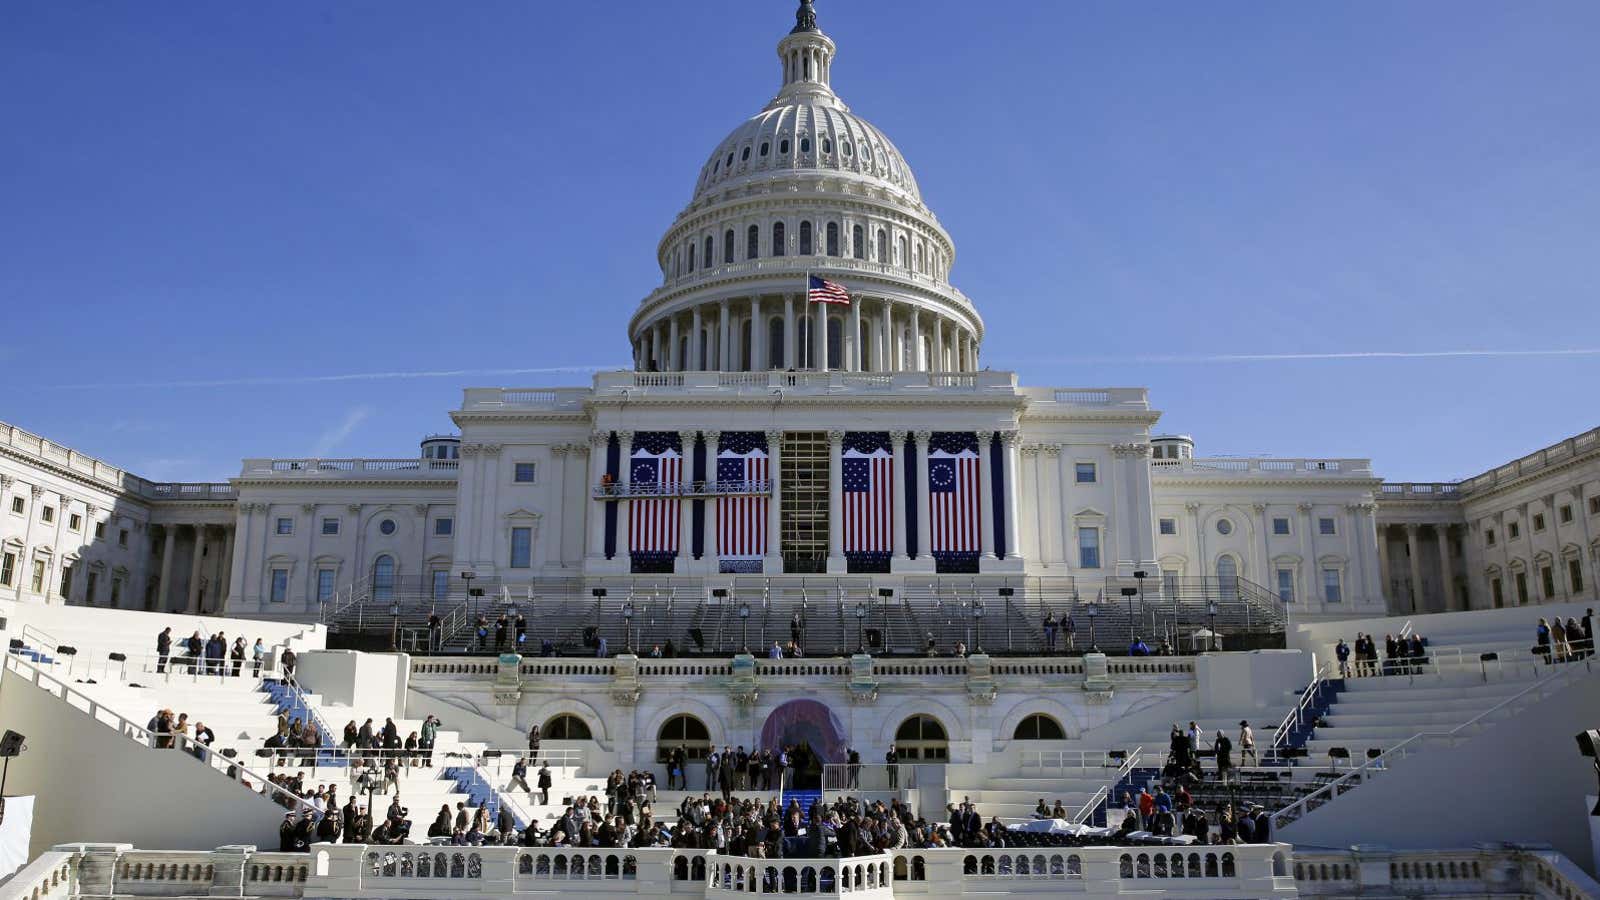 The US Capitol building is prepared for the Jan. 20 inauguration.